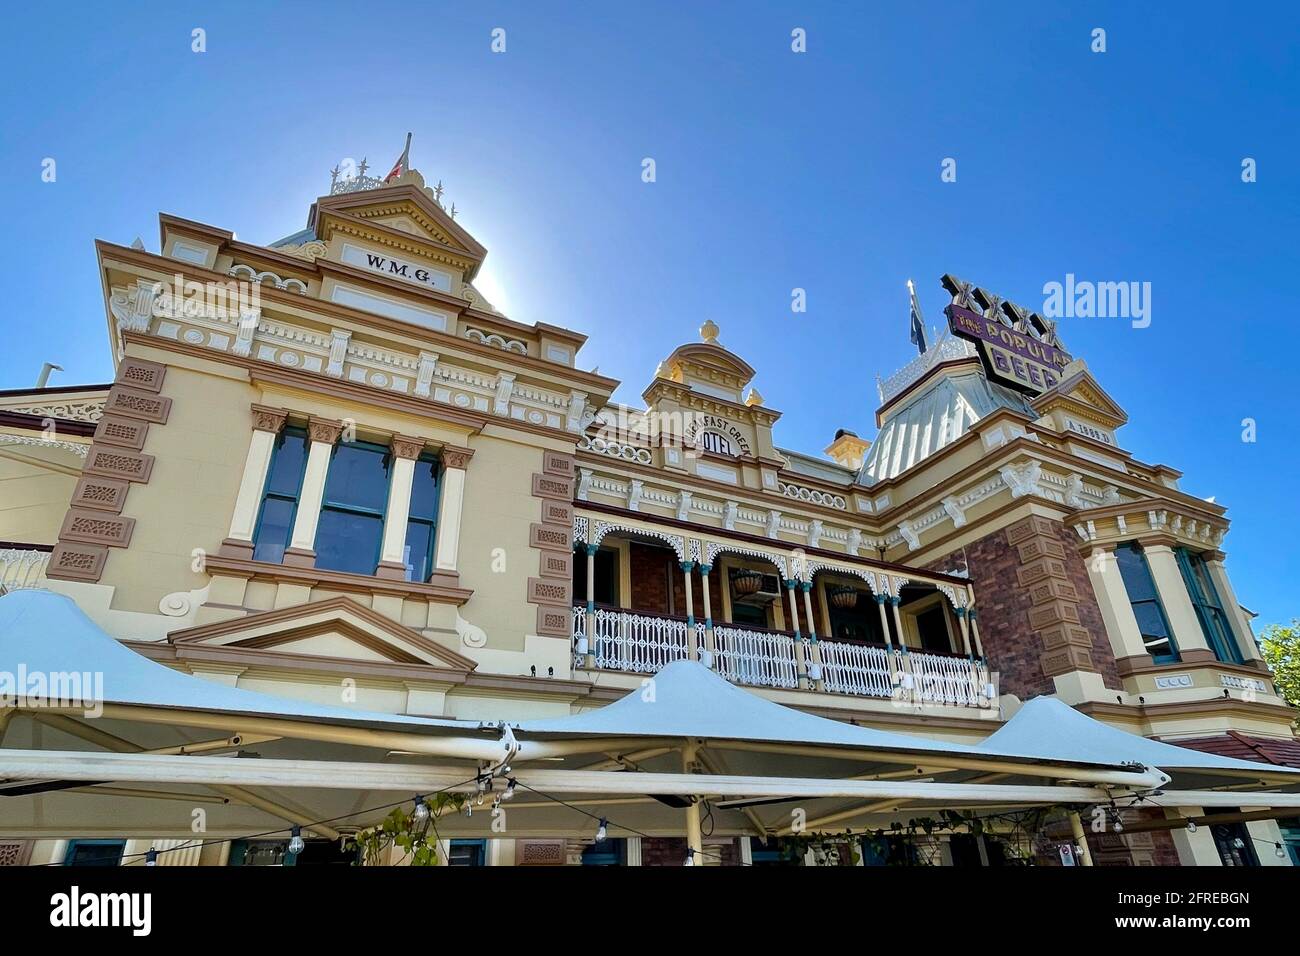 Facade of the Breakfast Creek Hotel, built in 1889 in French Renaissance architecture style in Albion suburb of Brisbane, Queensland Stock Photo